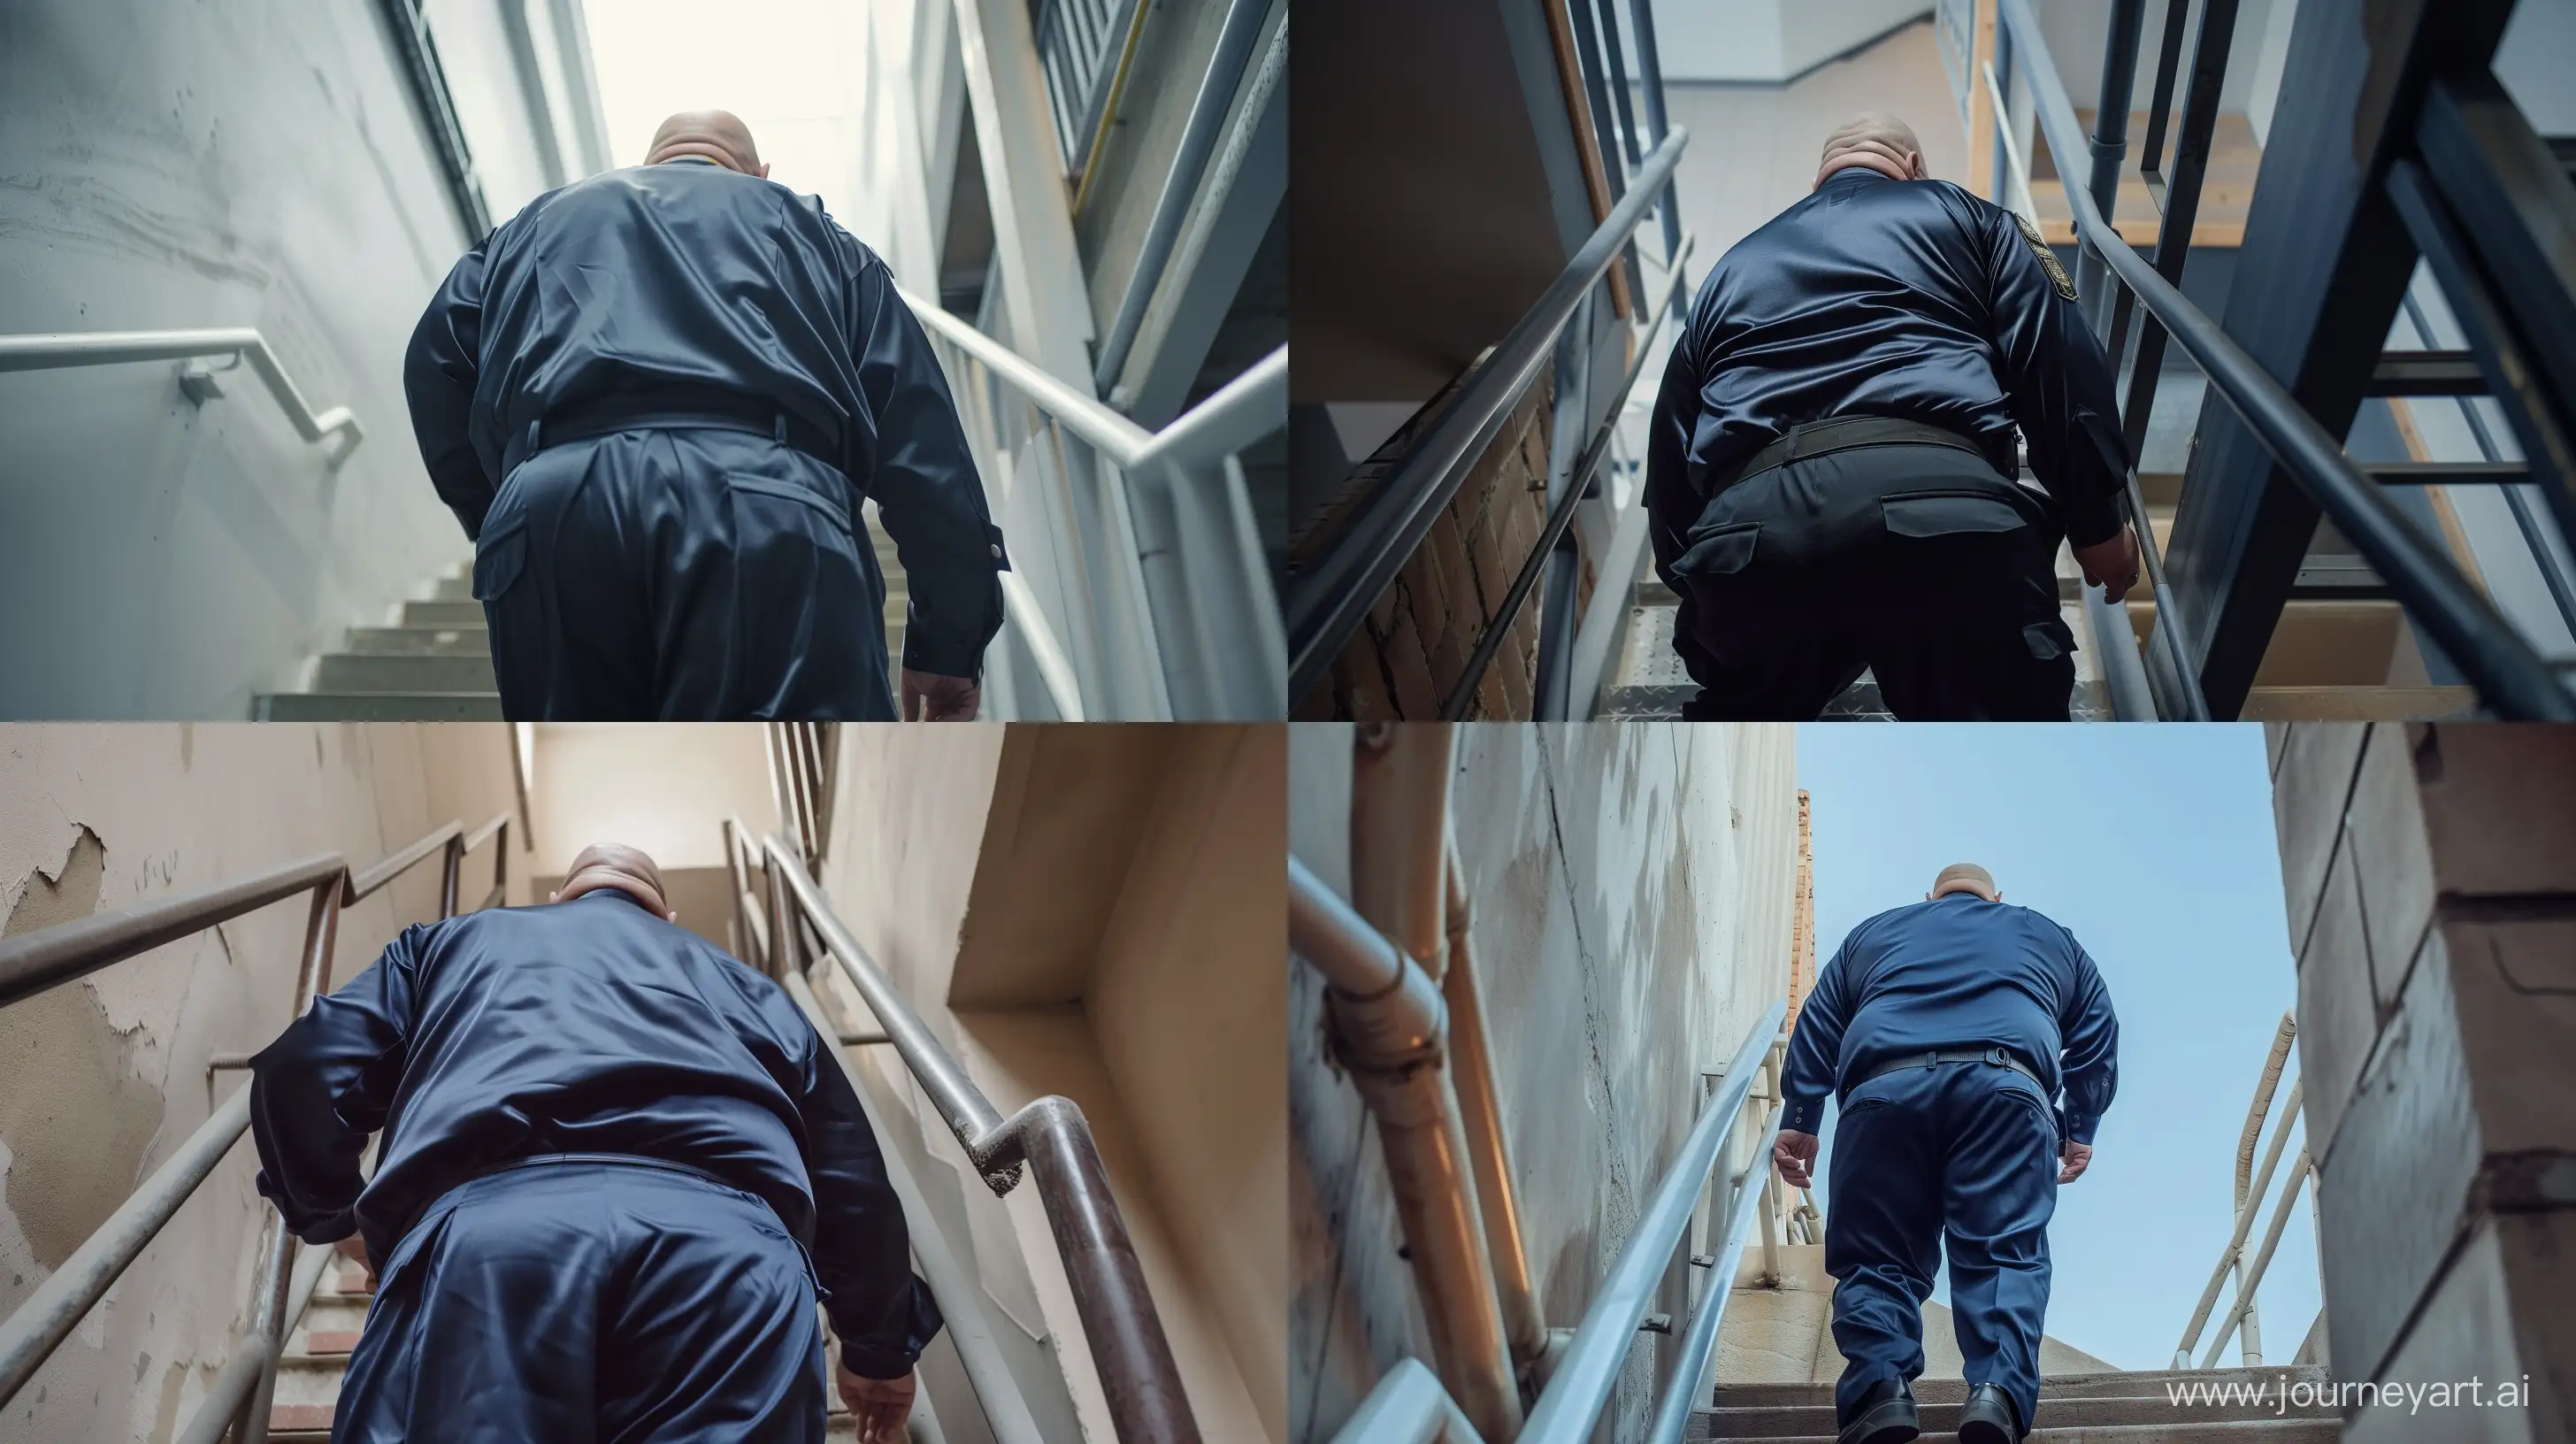 Elderly-Security-Guard-Ascending-Stairs-in-Navy-Silk-Uniform